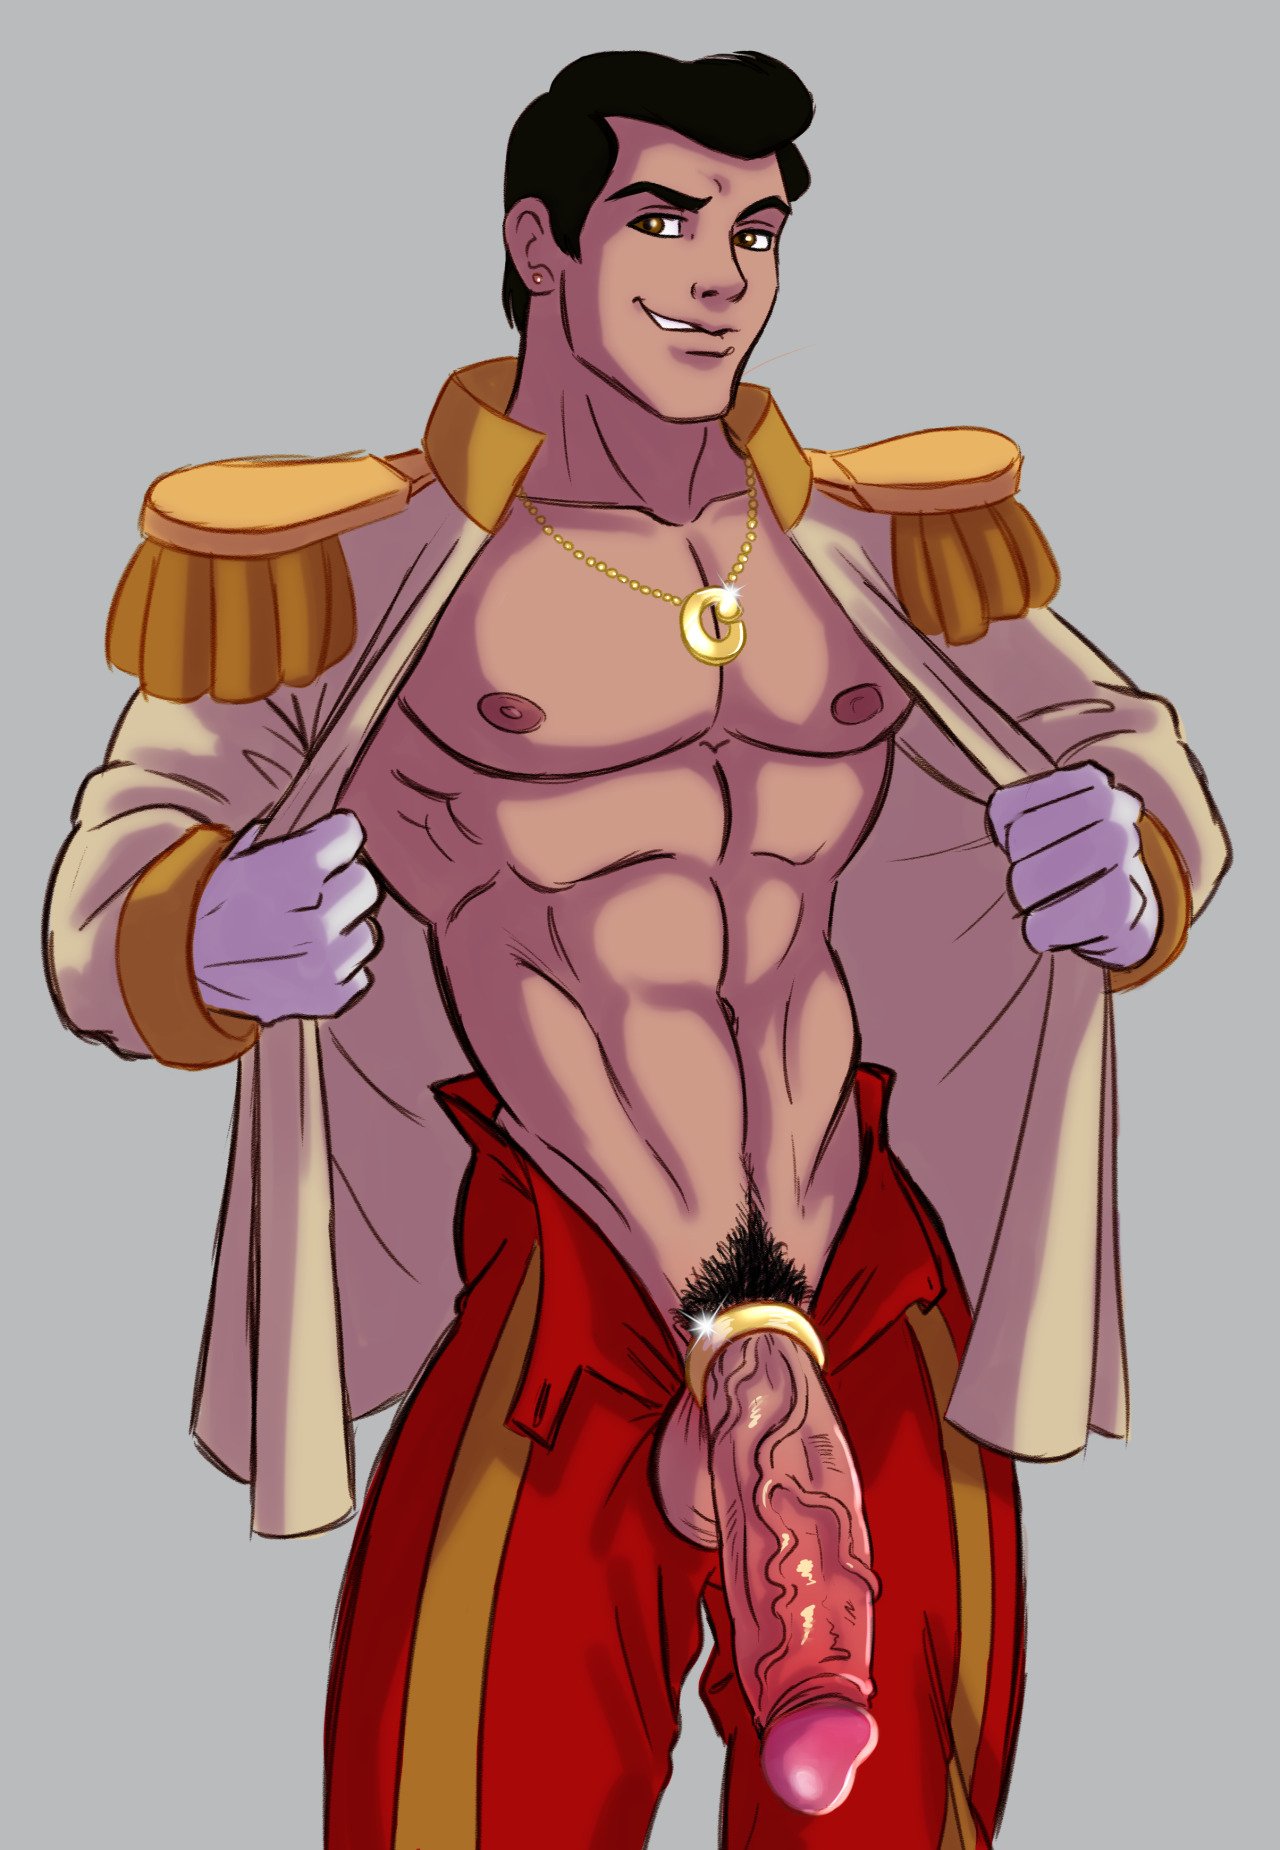 Gay Bara Lover on Twitter: "Prince charming, oh la-la https://t.co/wKy...